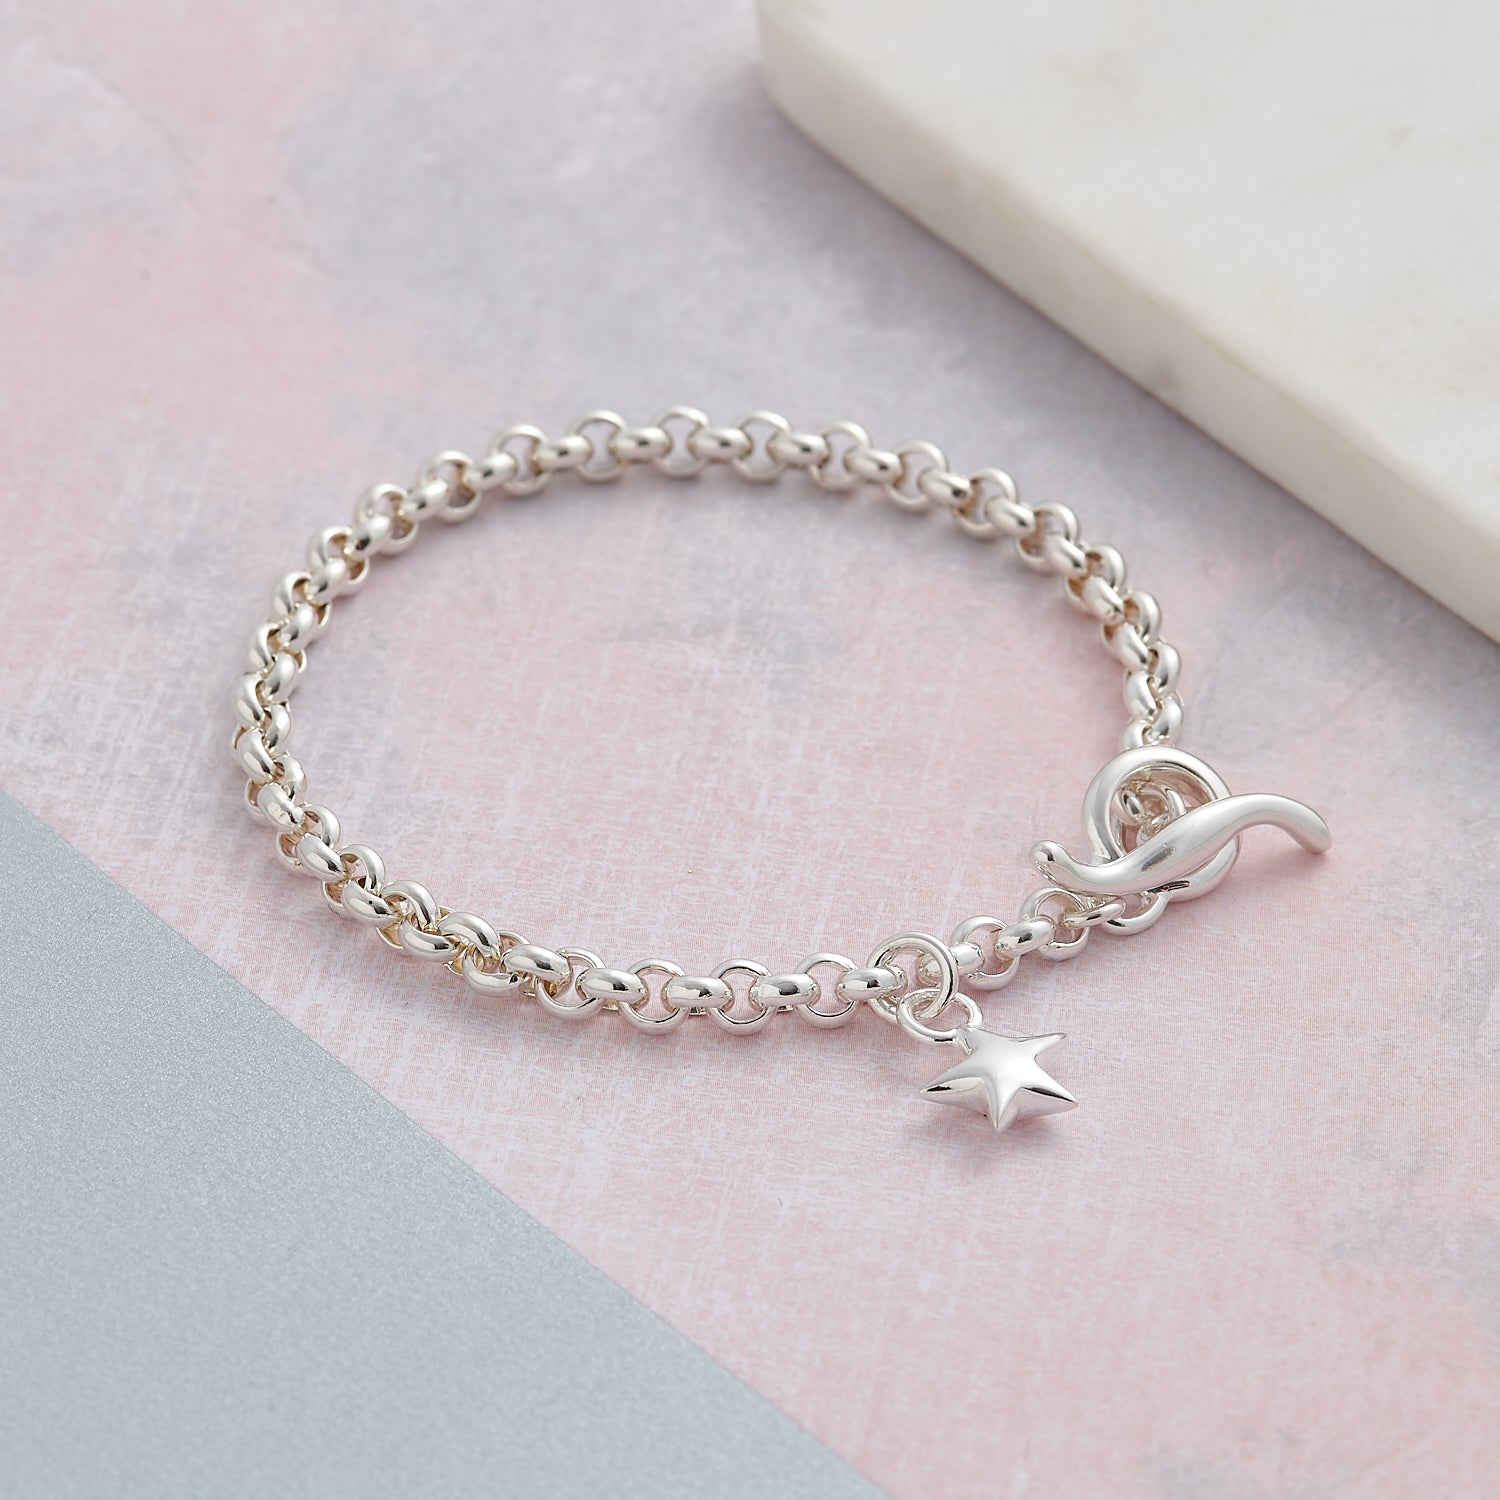 Classic vintage style solid silver charm bracelet belcher chain with star Scarlett Jewellery